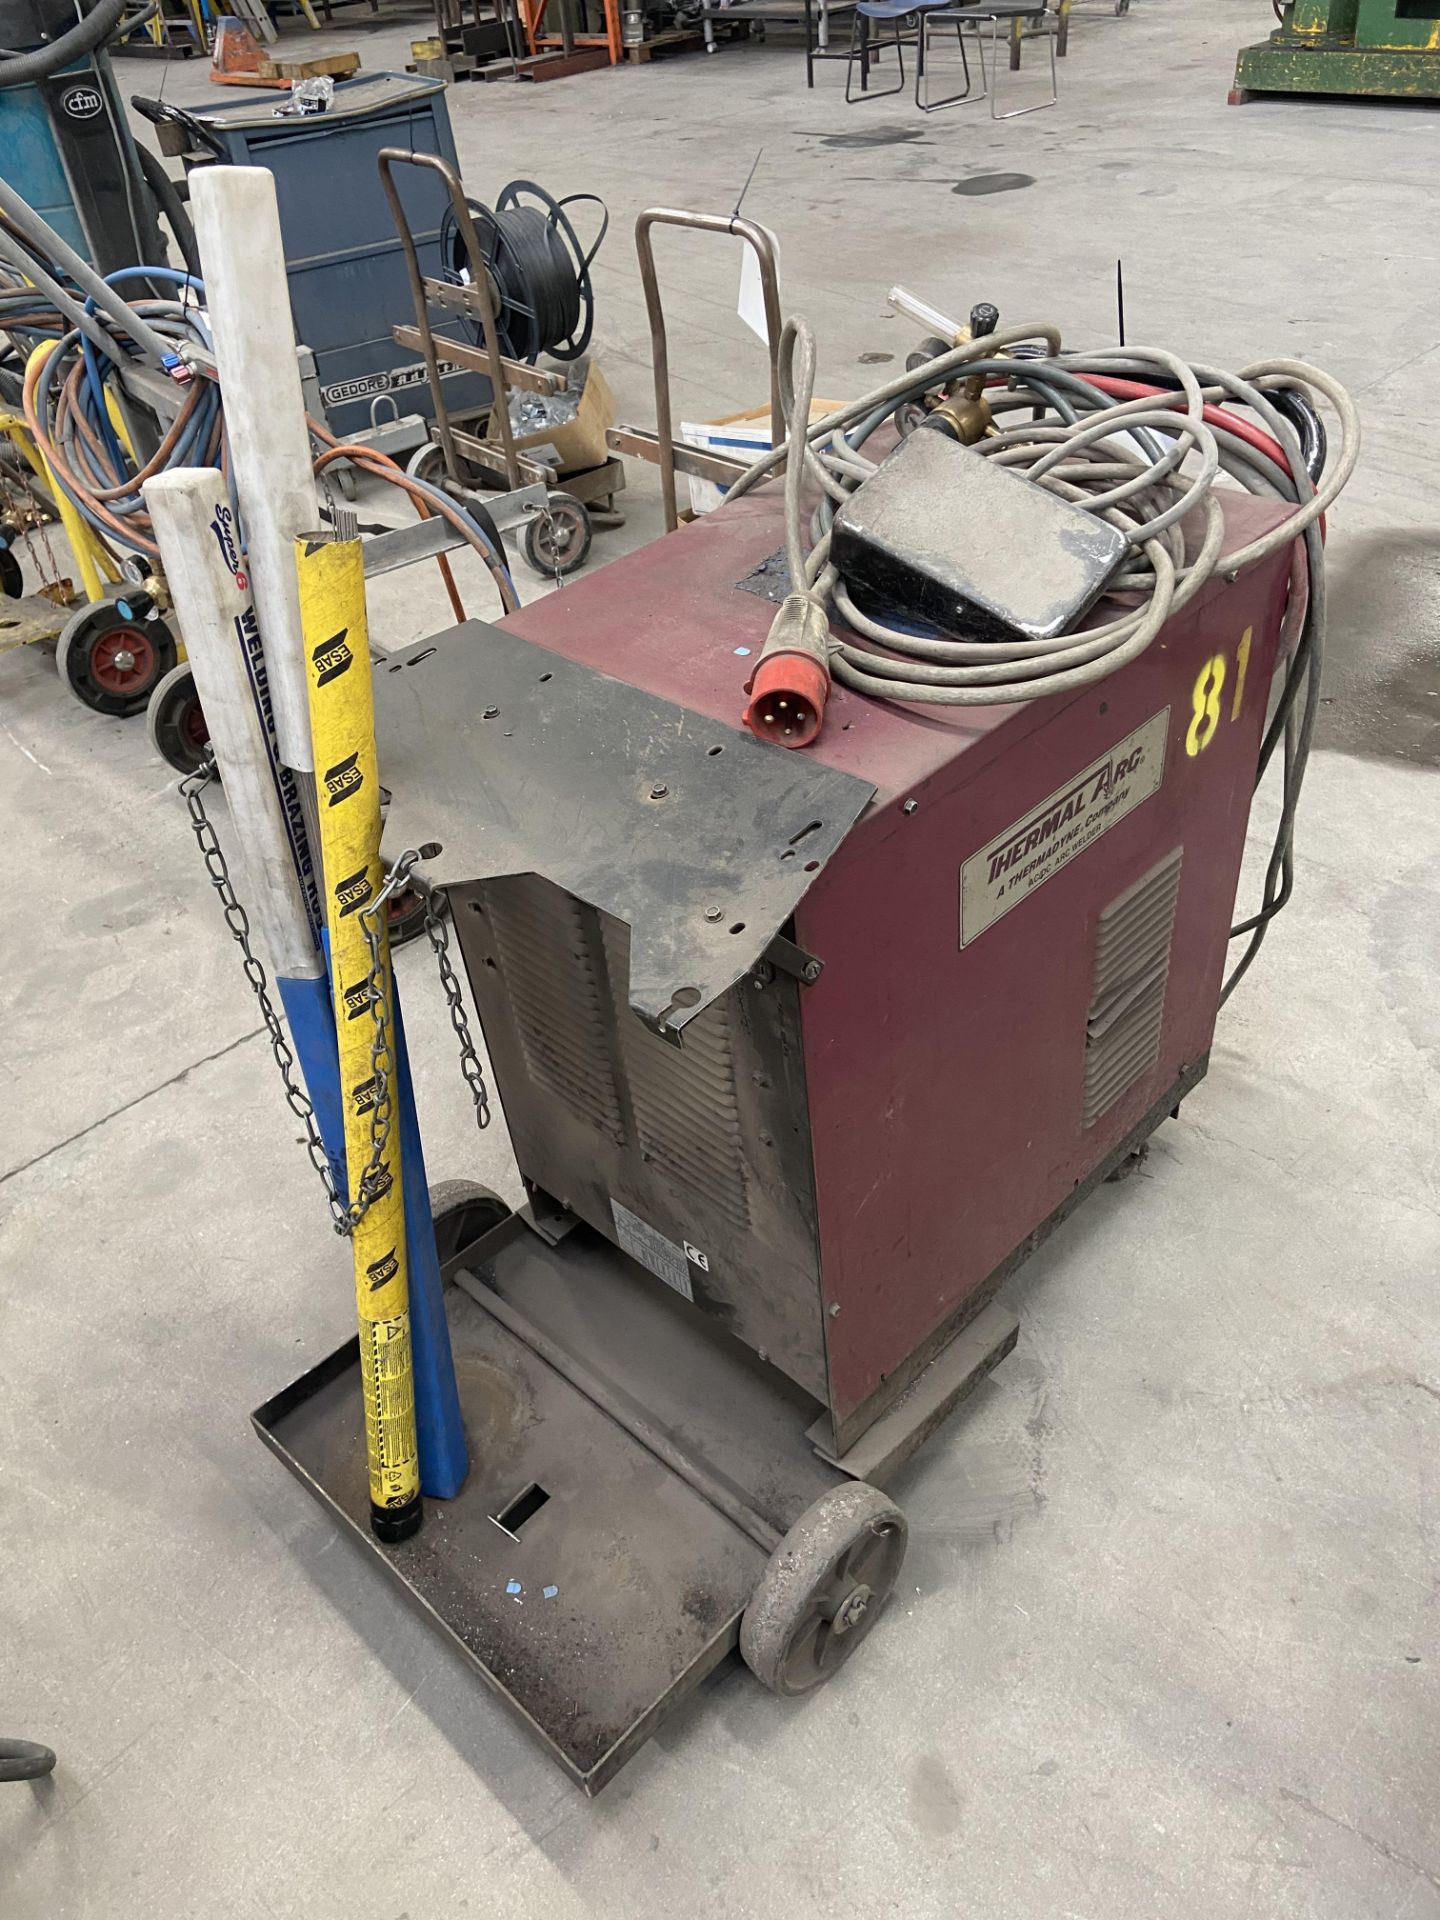 Thermal Arc Tig Wave 250 AC/DC Tig Welding Unit, serial no. 310A/32.4V Please read the following - Image 5 of 5